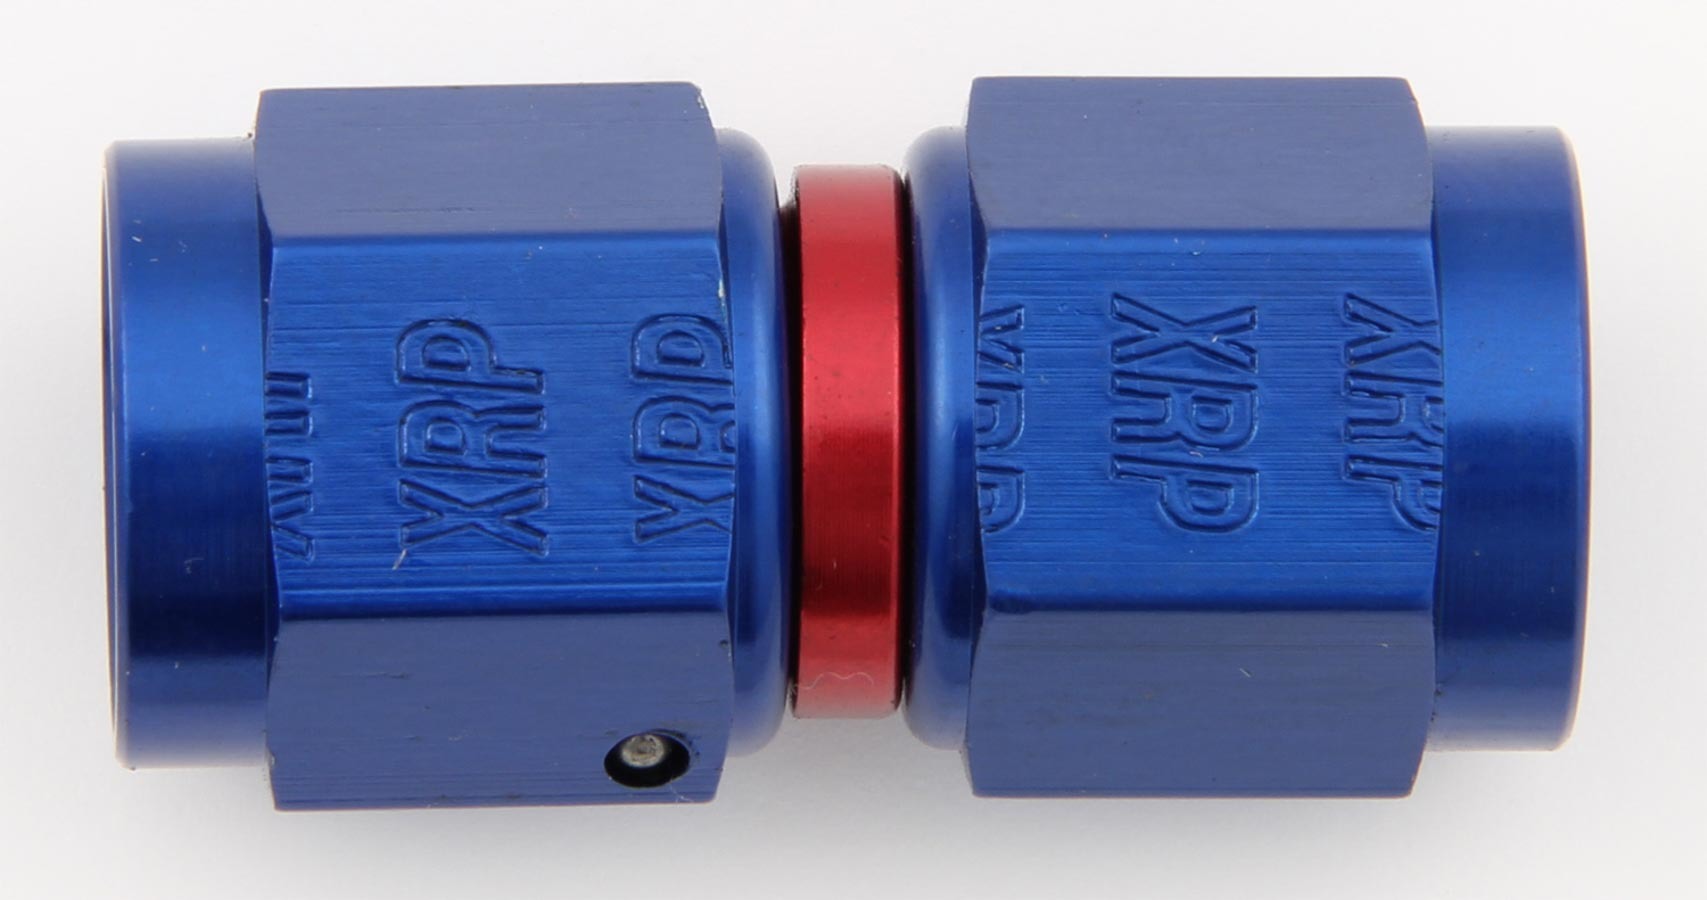 XRP 900106 Fitting, Adapter, Straight, 6 AN Female Swivel to 6 AN Female Swivel, Aluminum, Blue / Red Anodized, Each